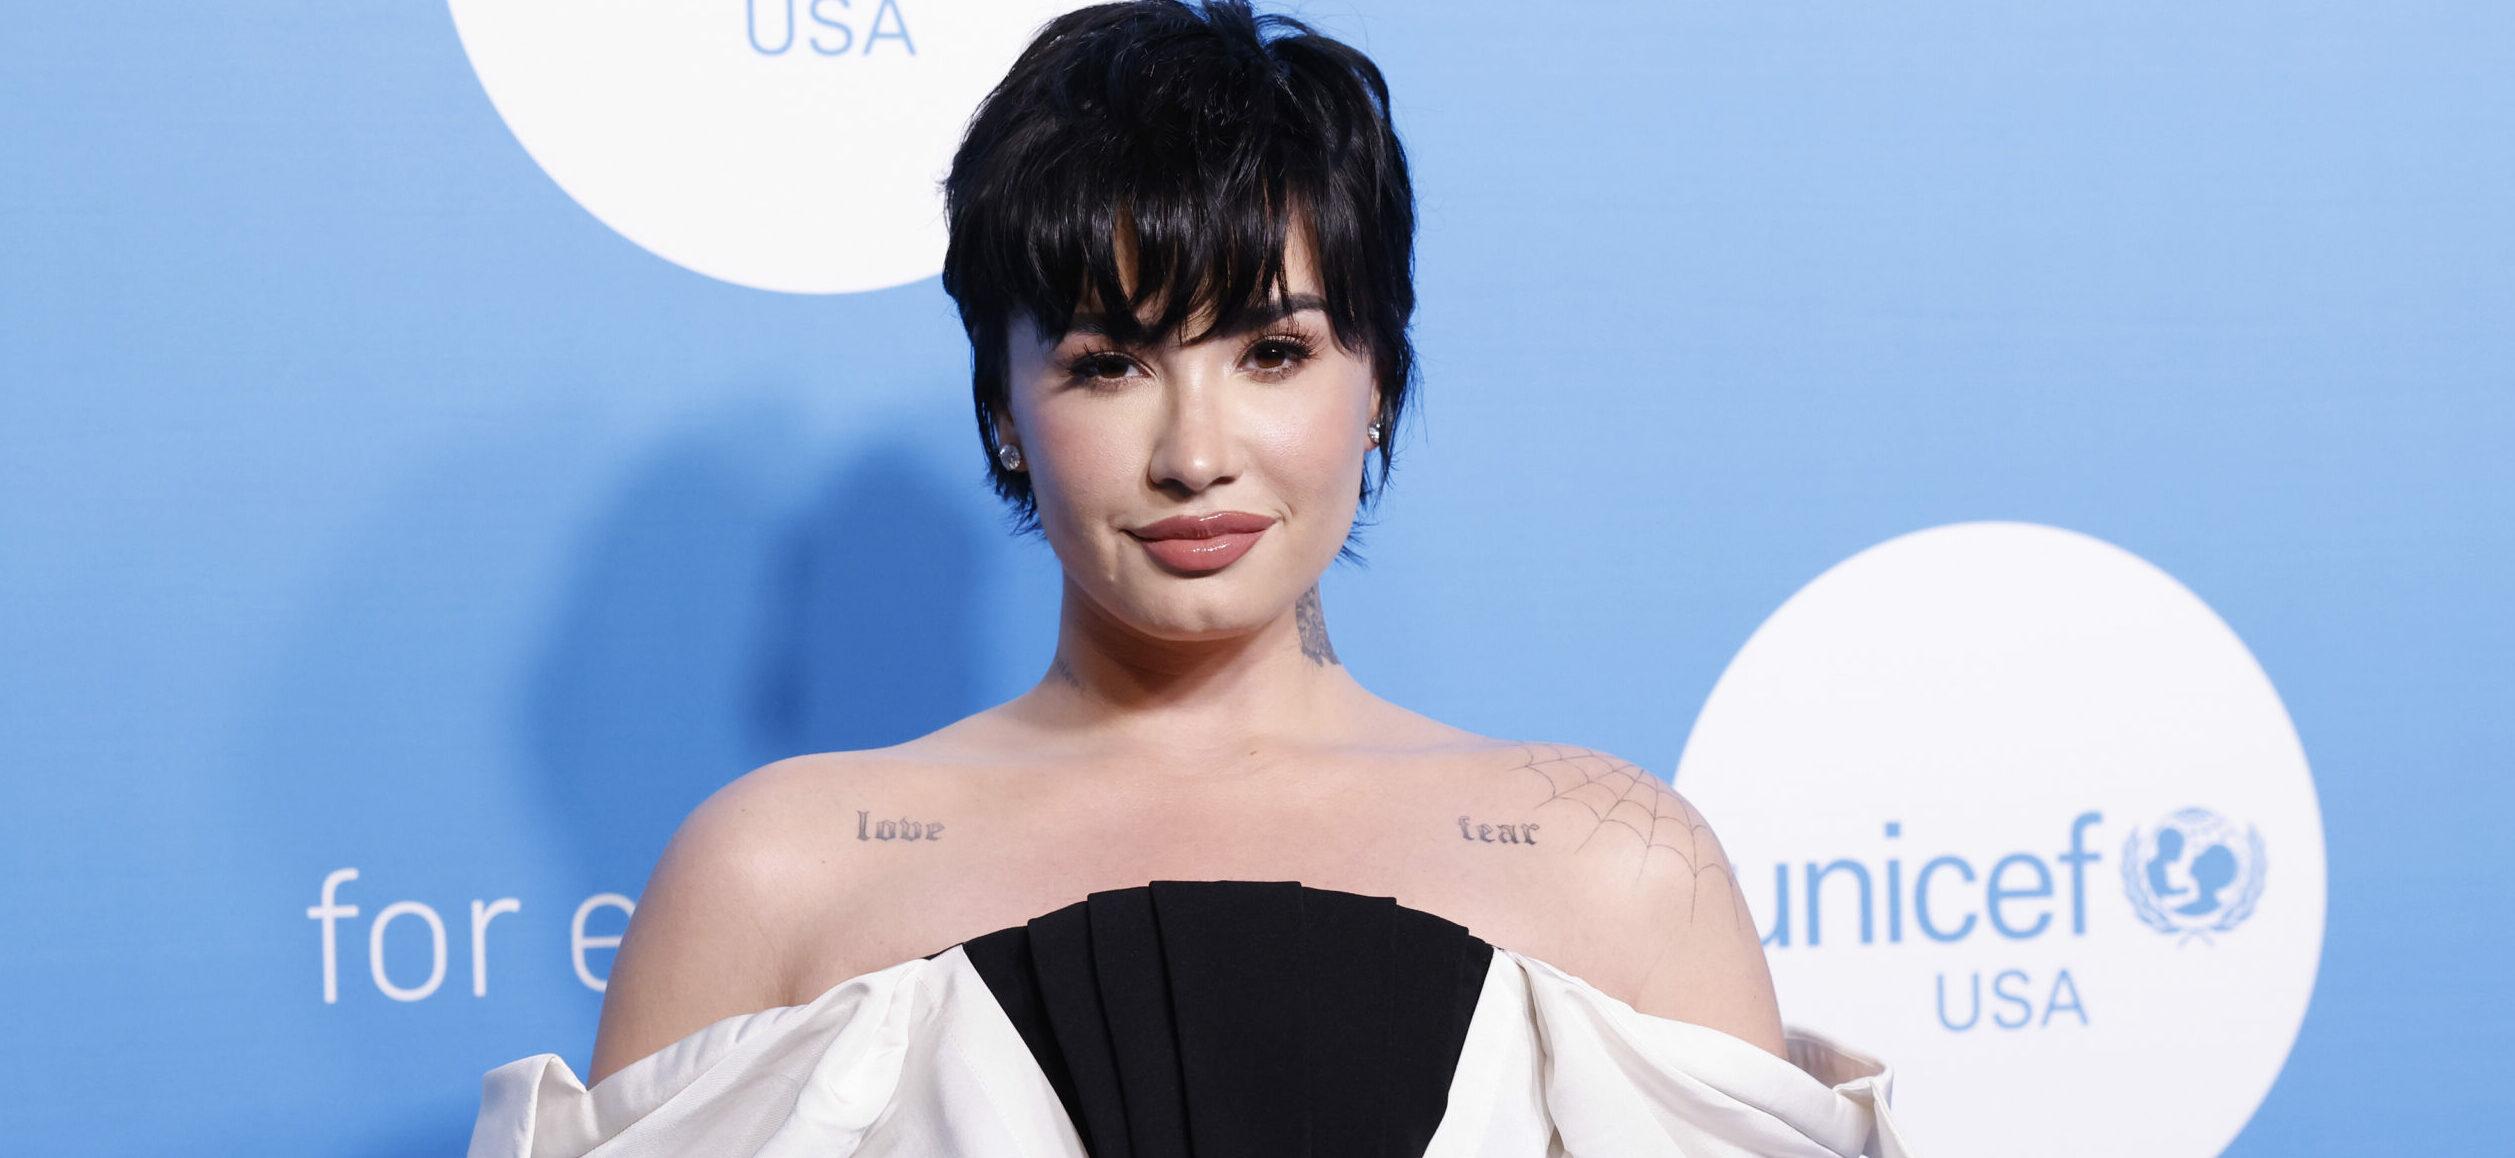 Singer Demi Lovato Reveals She Was ‘So Relieved’ To Be Diagnosed As Bipolar